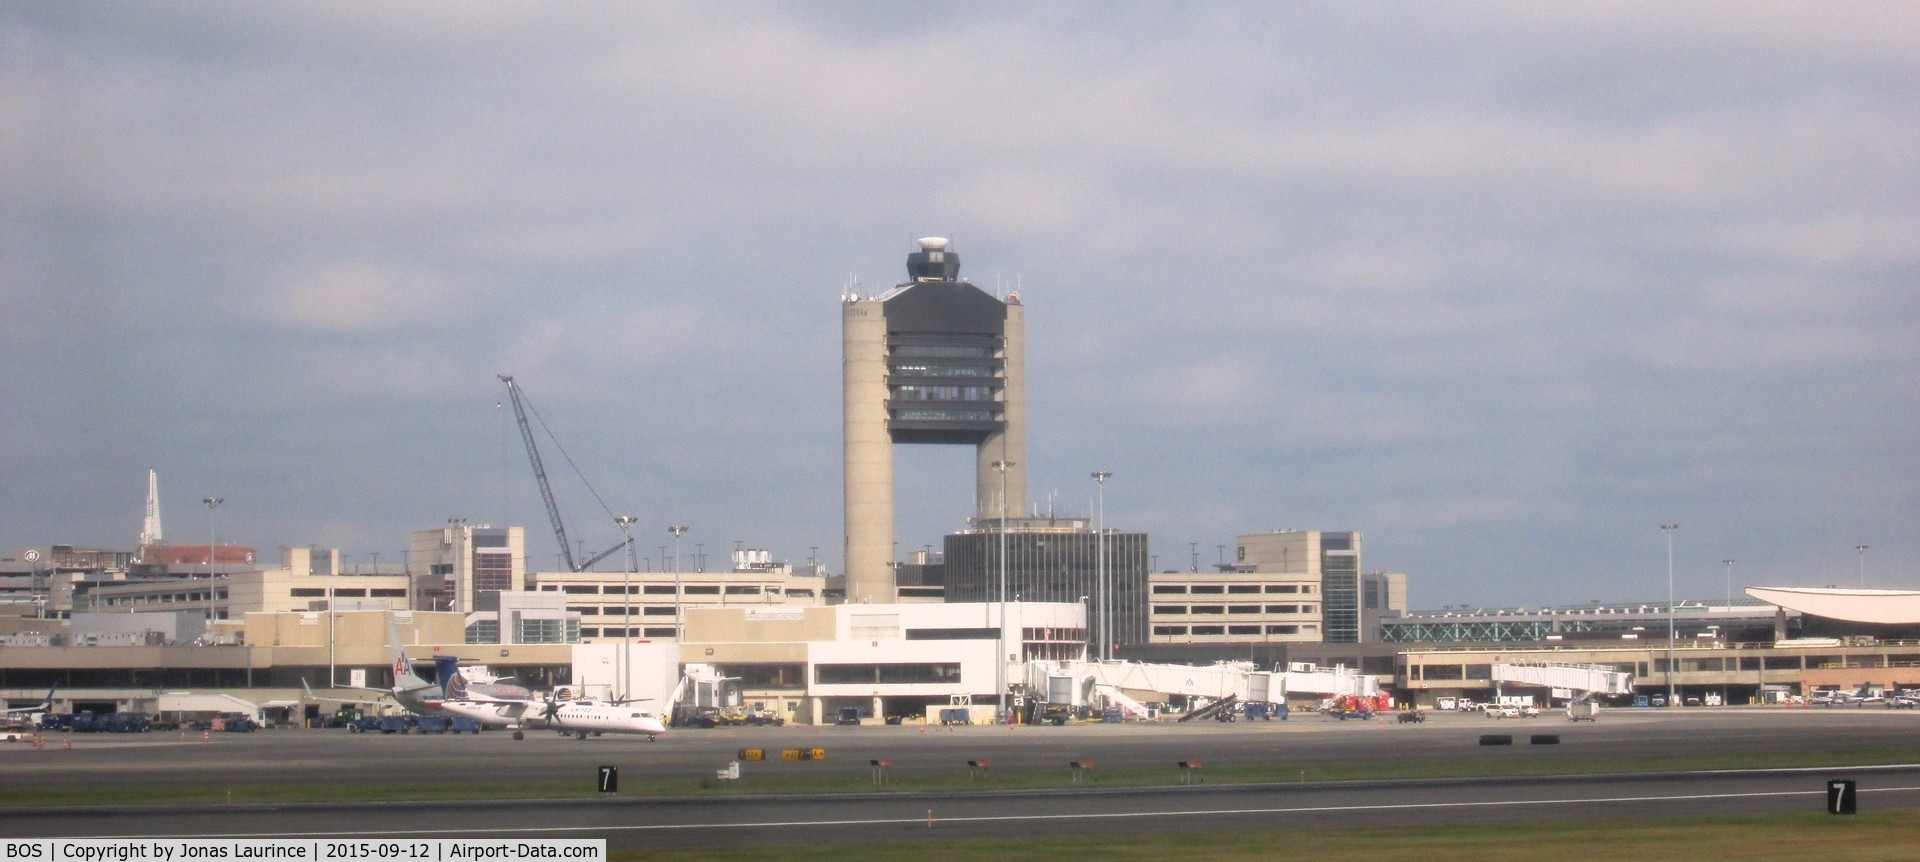 General Edward Lawrence Logan International Airport (BOS) - View of the Logan International Airport of Boston and the Control Tower